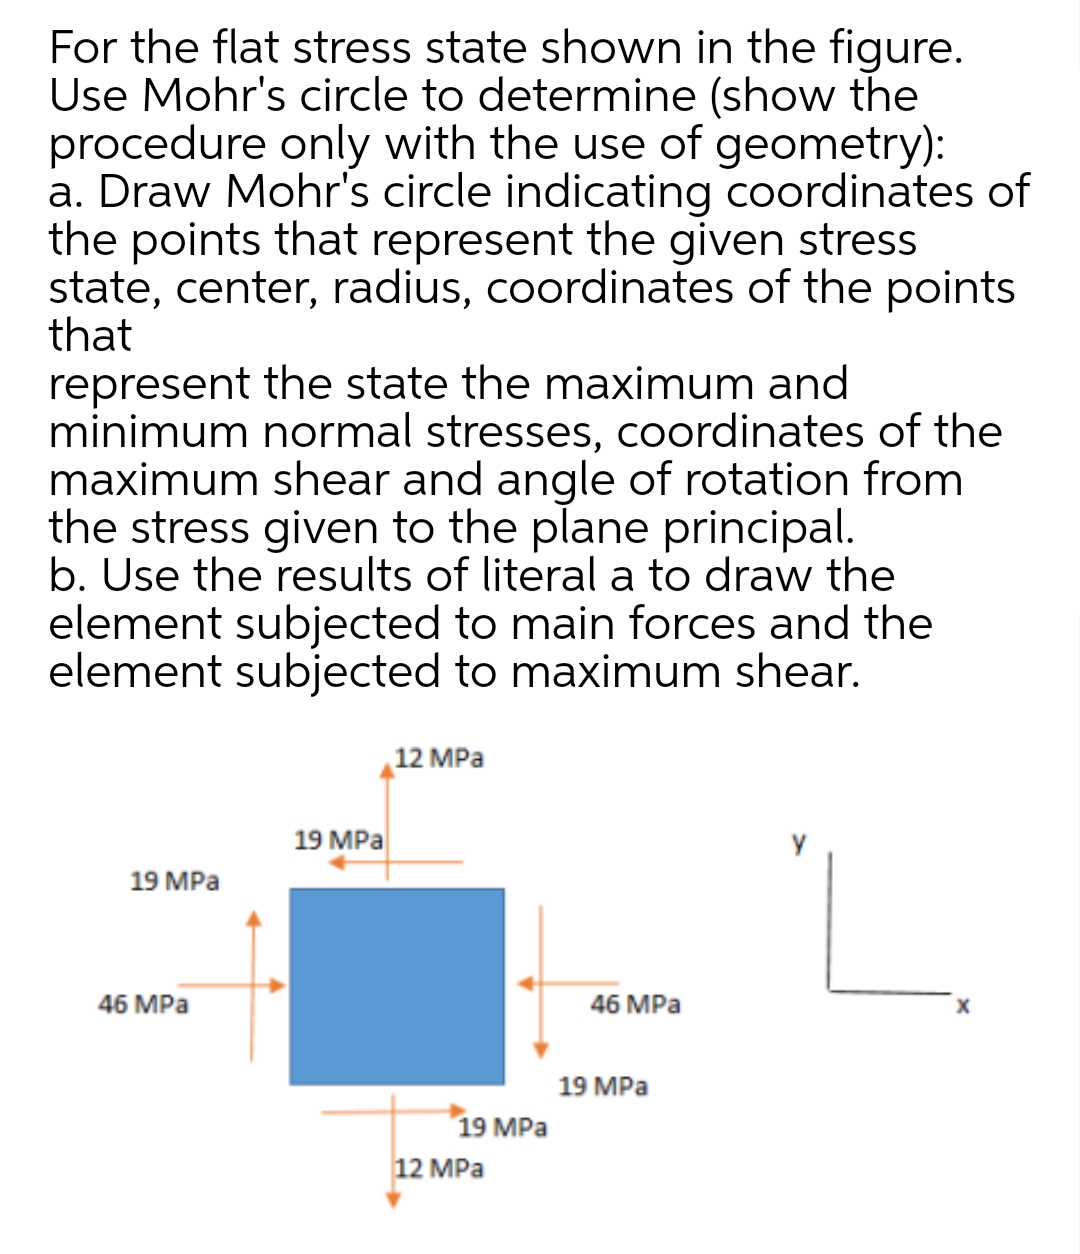 For the flat stress state shown in the figure.
Use Mohr's circle to determine (show the
procedure only with the use of geometry):
a. Draw Mohr's circle indicating coordinates of
the points that represent the given stress
state, center, radius, coordinates of the points
that
represent the state the maximum and
minimum normal stresses, coordinates of the
maximum shear and angle of rotation from
the stress given to the plane principal.
b. Use the results of literal a to draw the
element subjected to main forces and the
element subjected to maximum shear.
12 MPa
19 MPа
y
19 MPа
46 MPа
46 MPа
19 MPа
19 MPа
12 MPa
